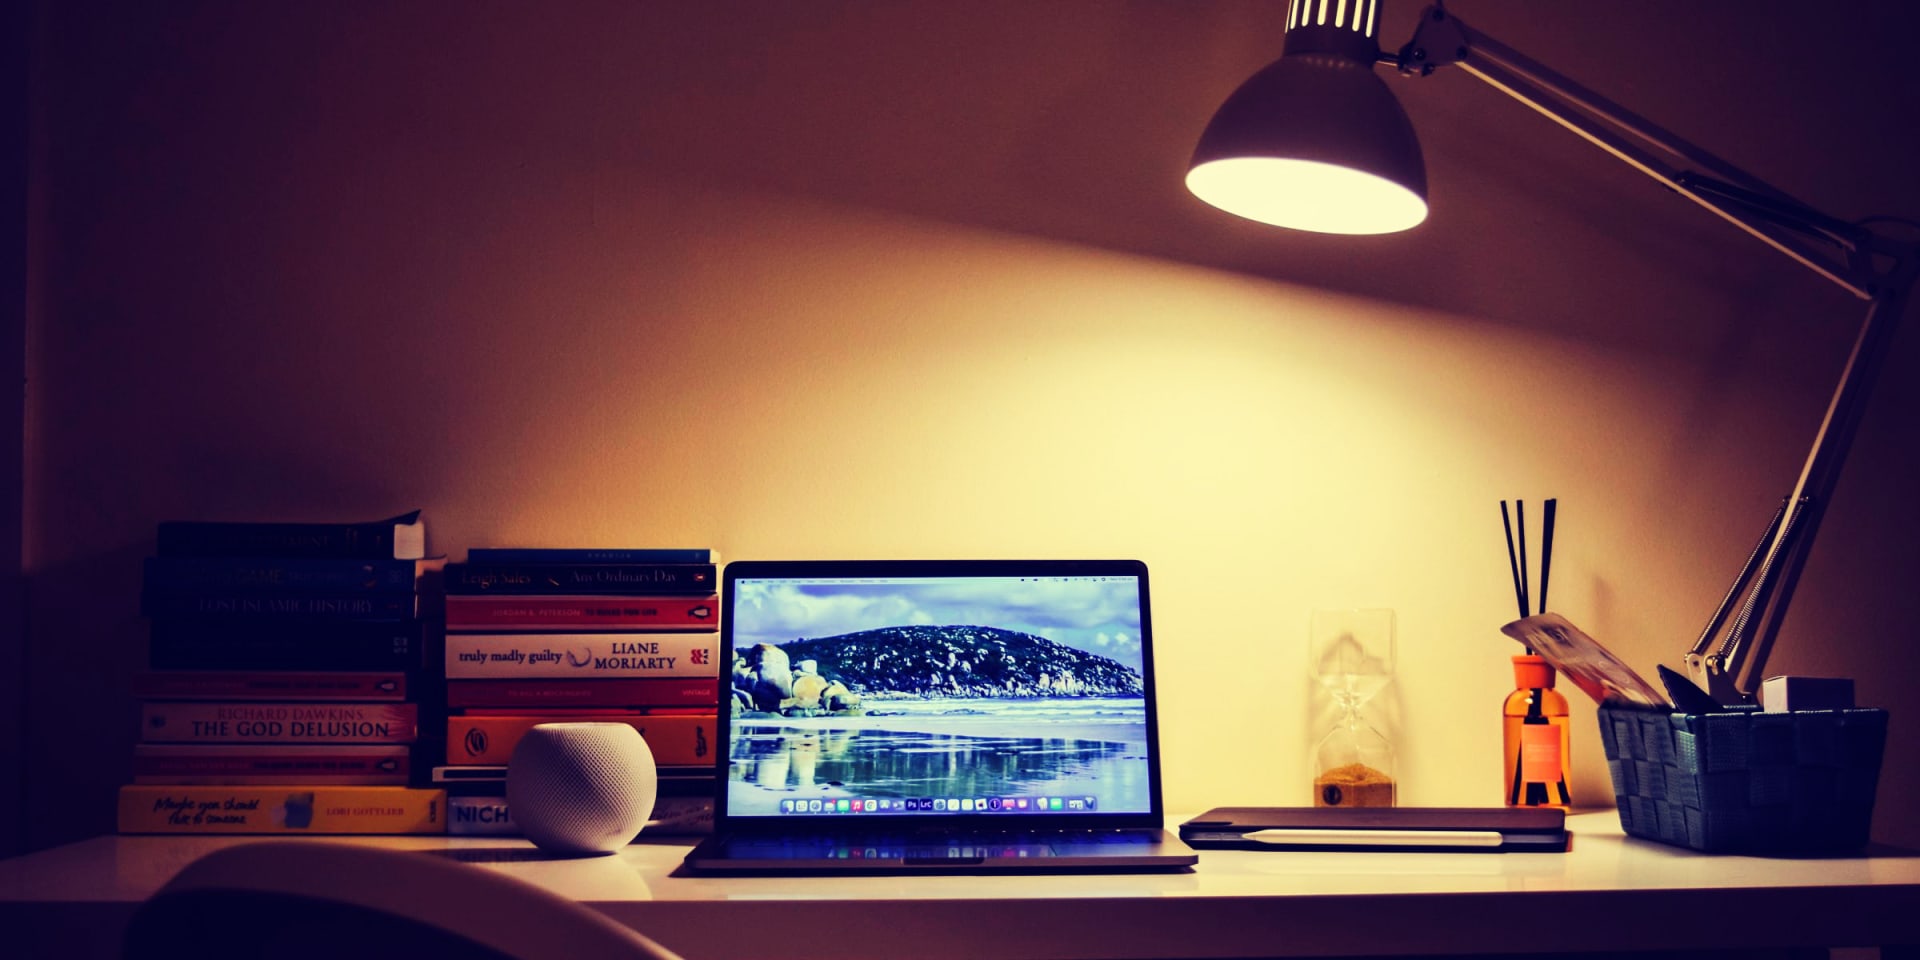 Screenbar vs Desk Lamps: Which One Will Work Best For You